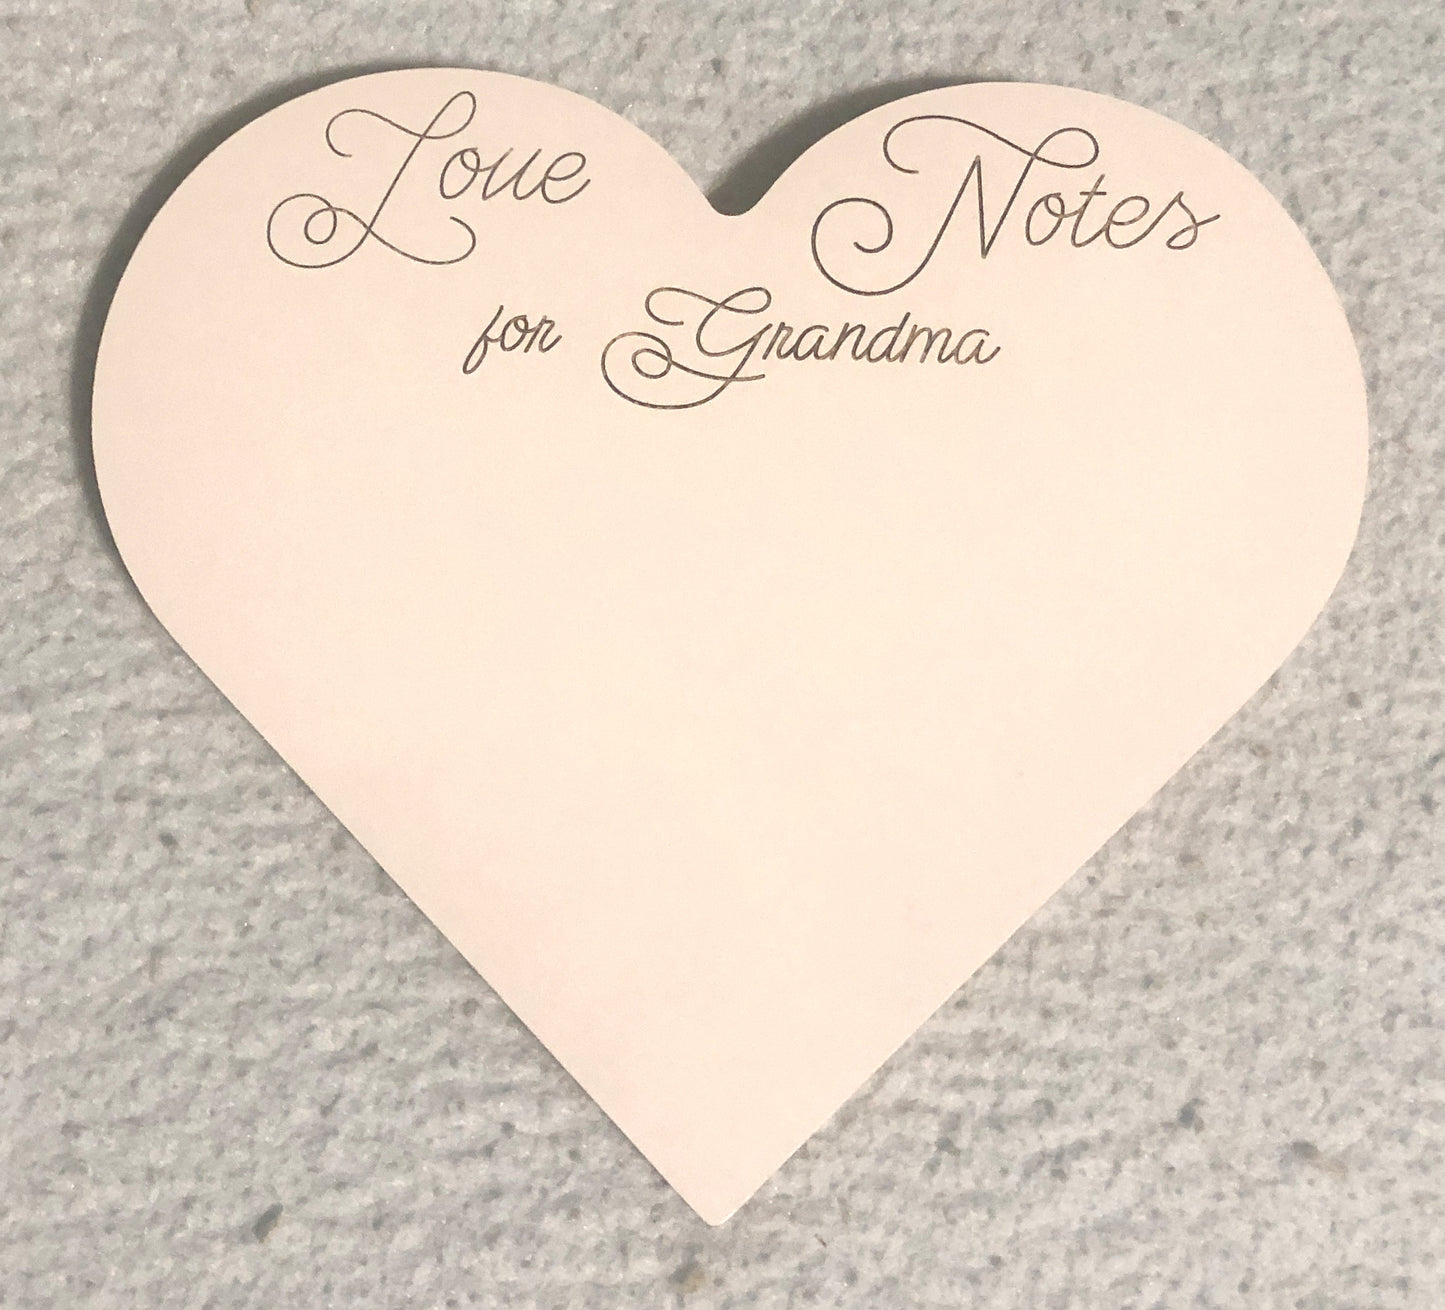 Heart shaped love Notes Message Board for Grandma